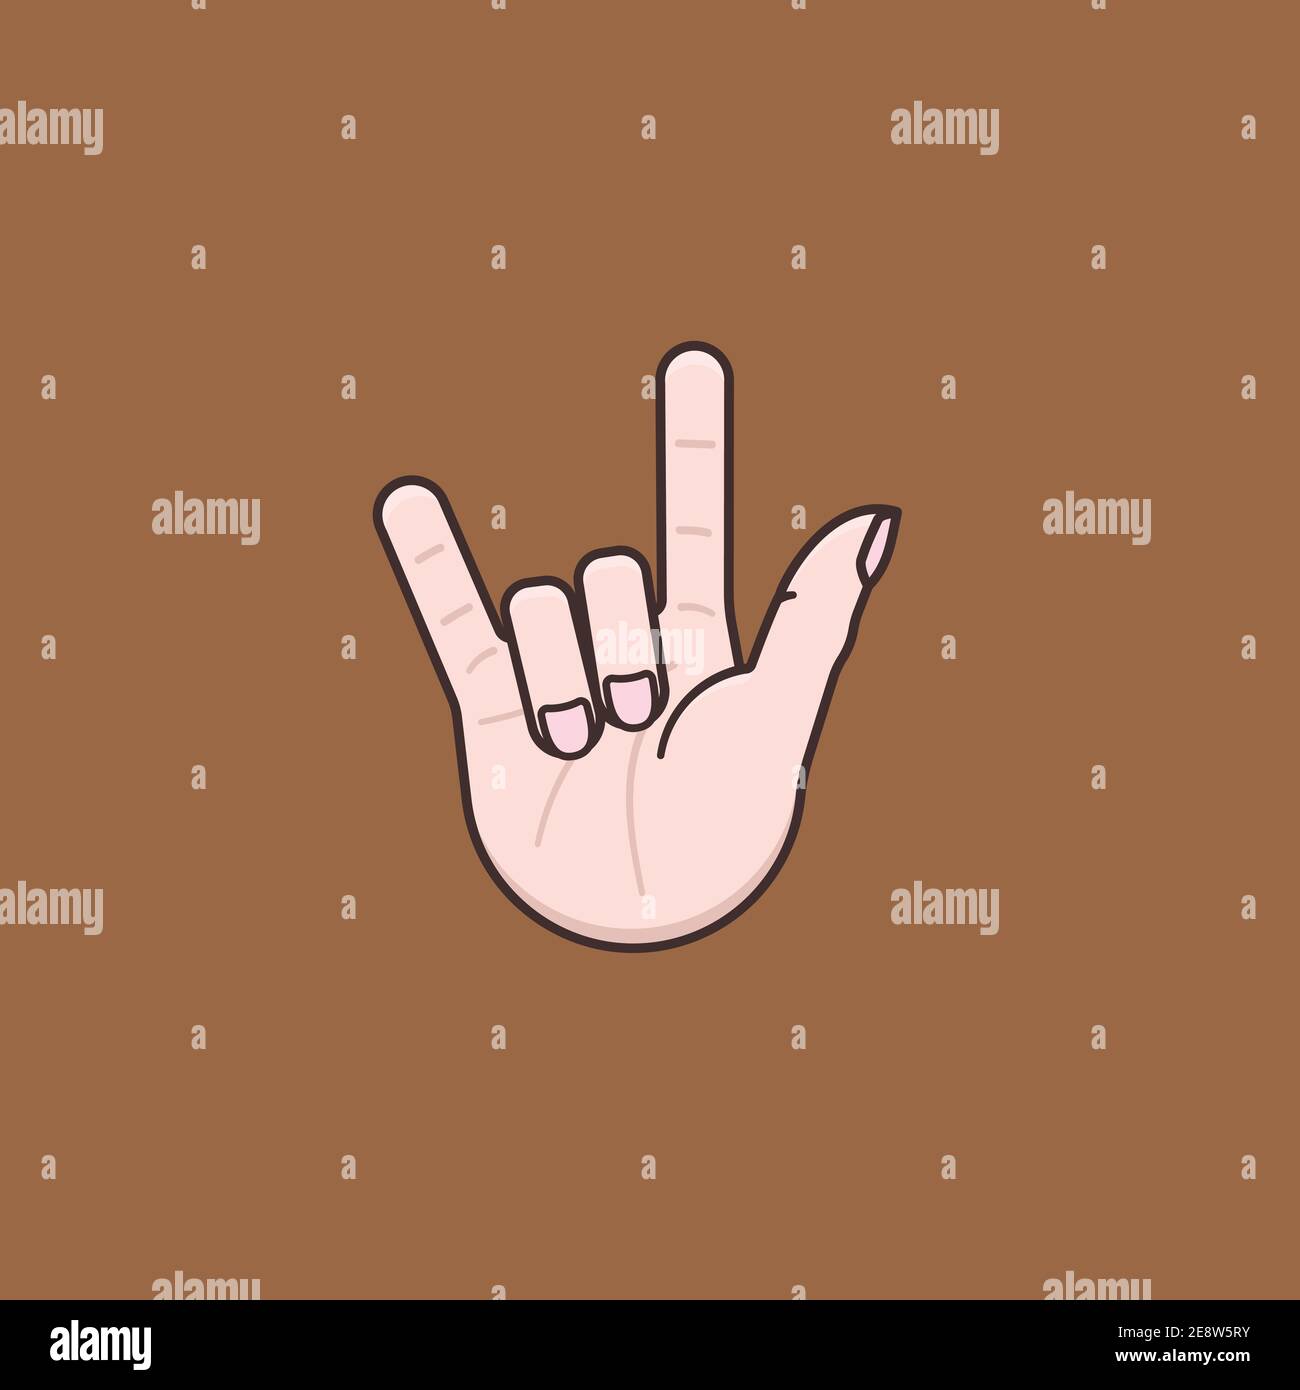 Hand sign meaning I love you vector illustration for Sign language day on September 23. Stock Vector